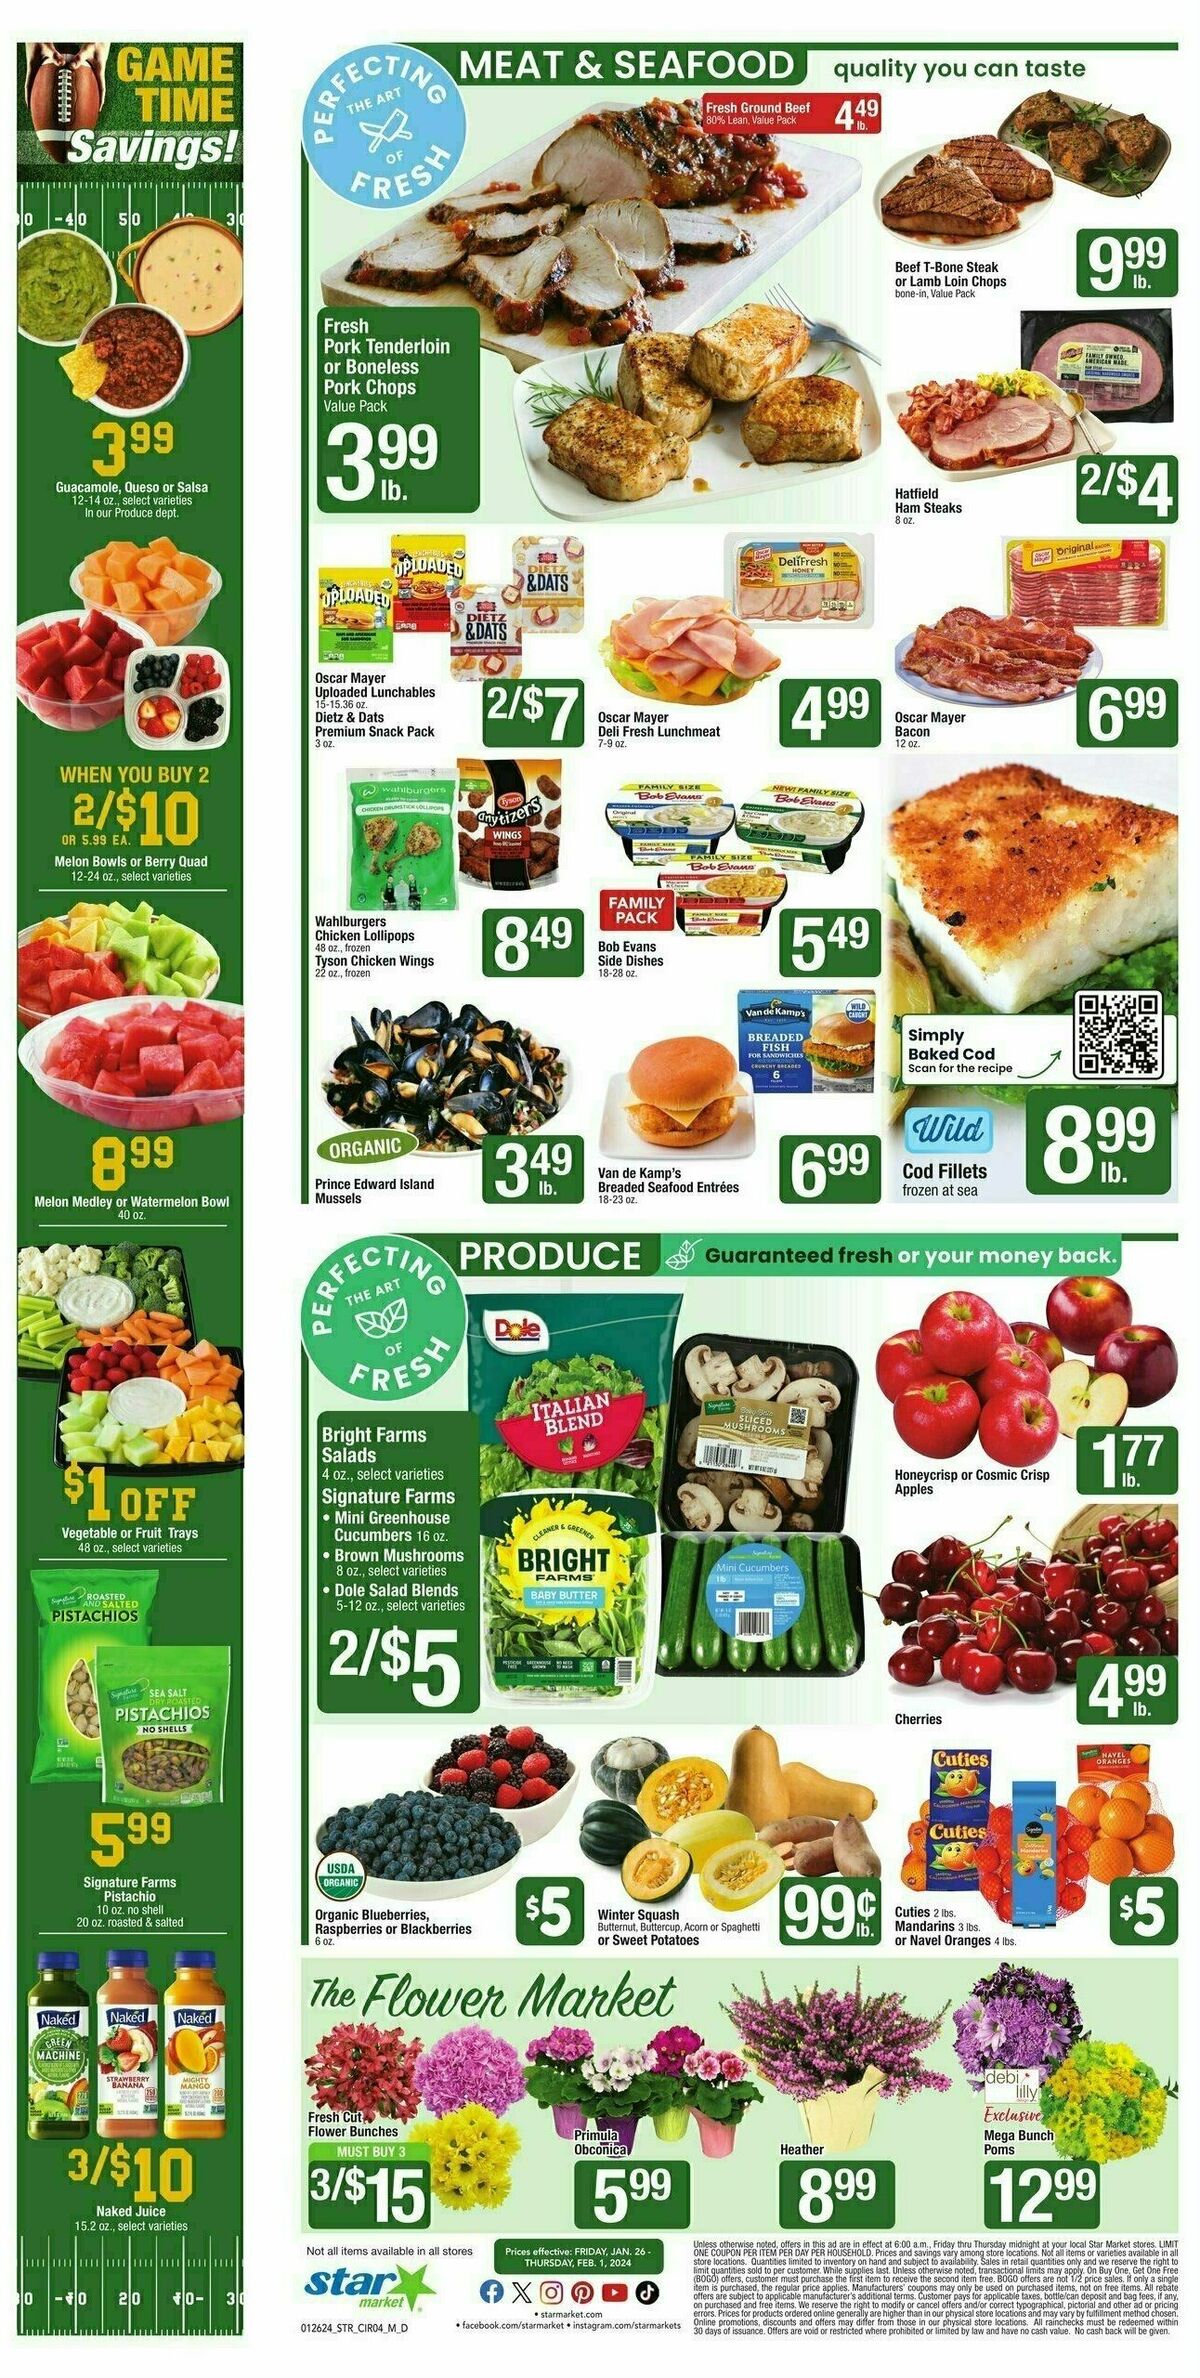 Star Market Weekly Ad from January 26